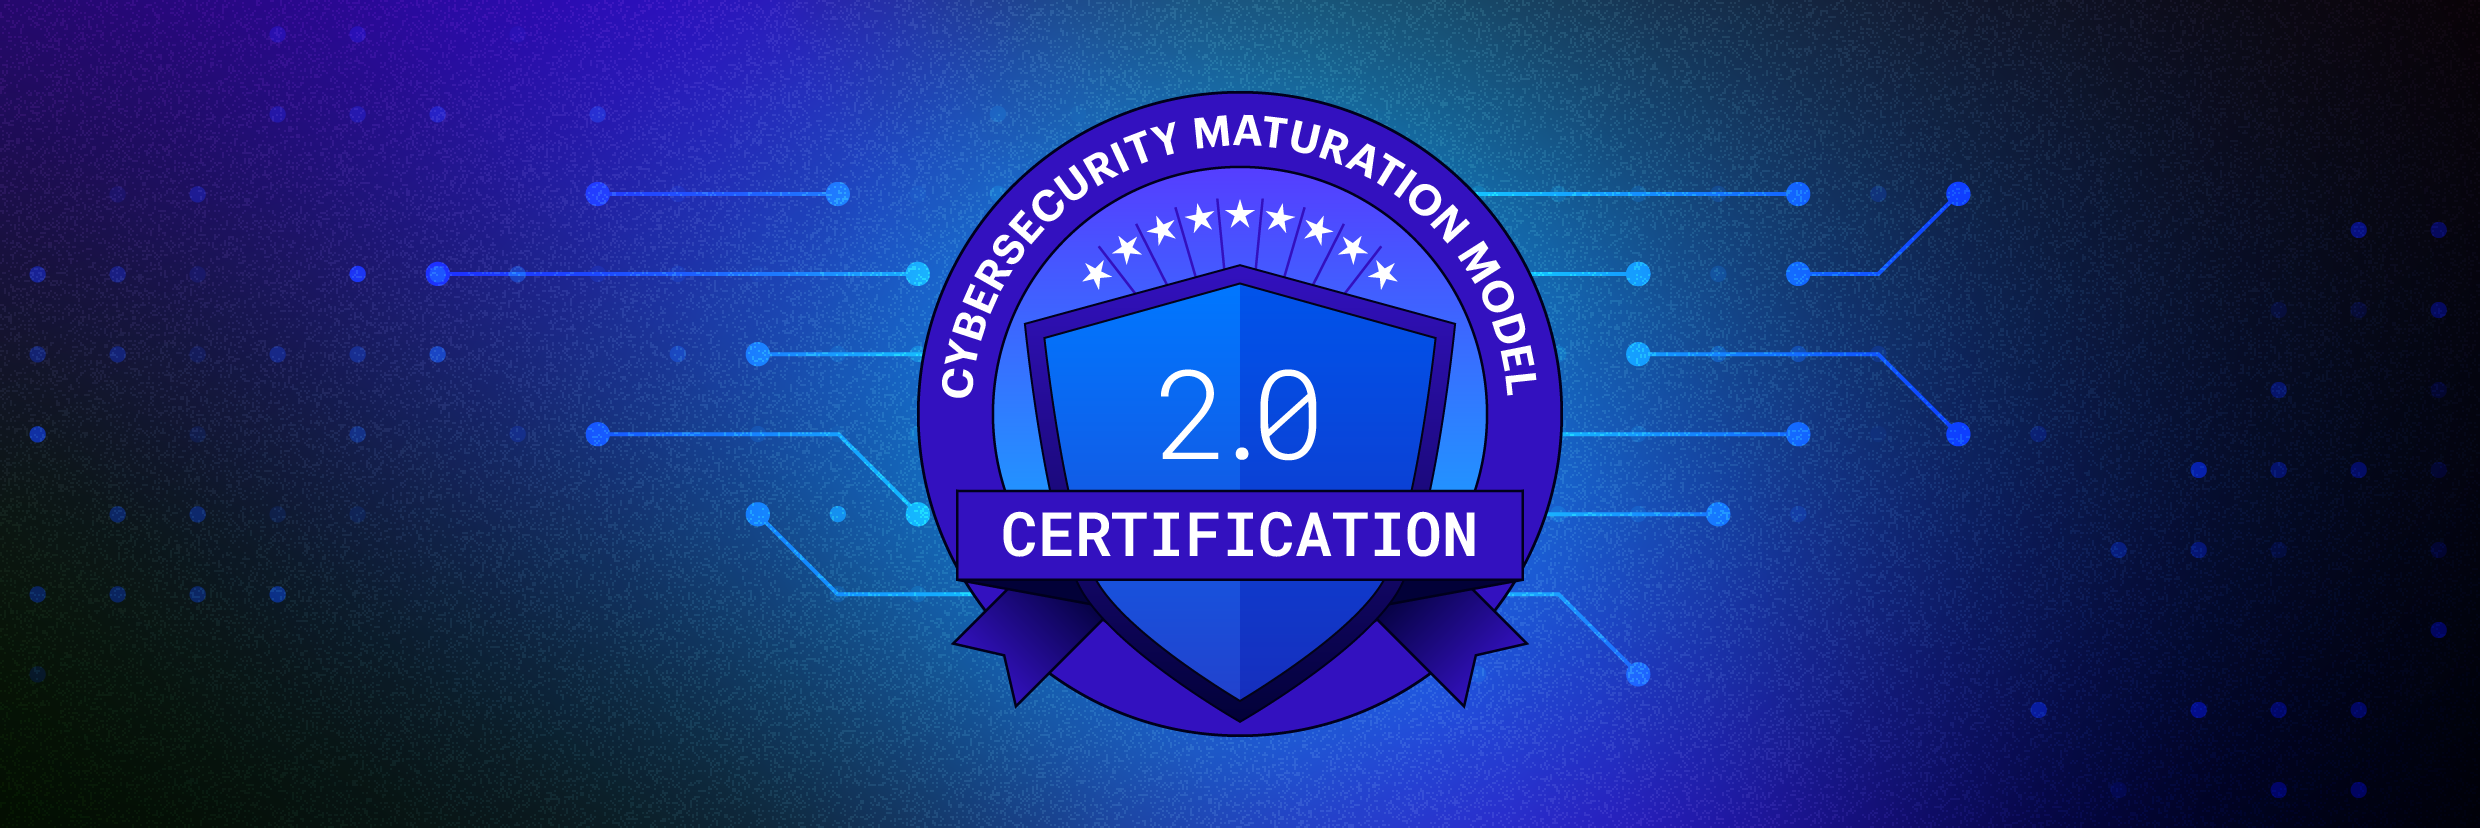 cybersecurity maturation model certification 